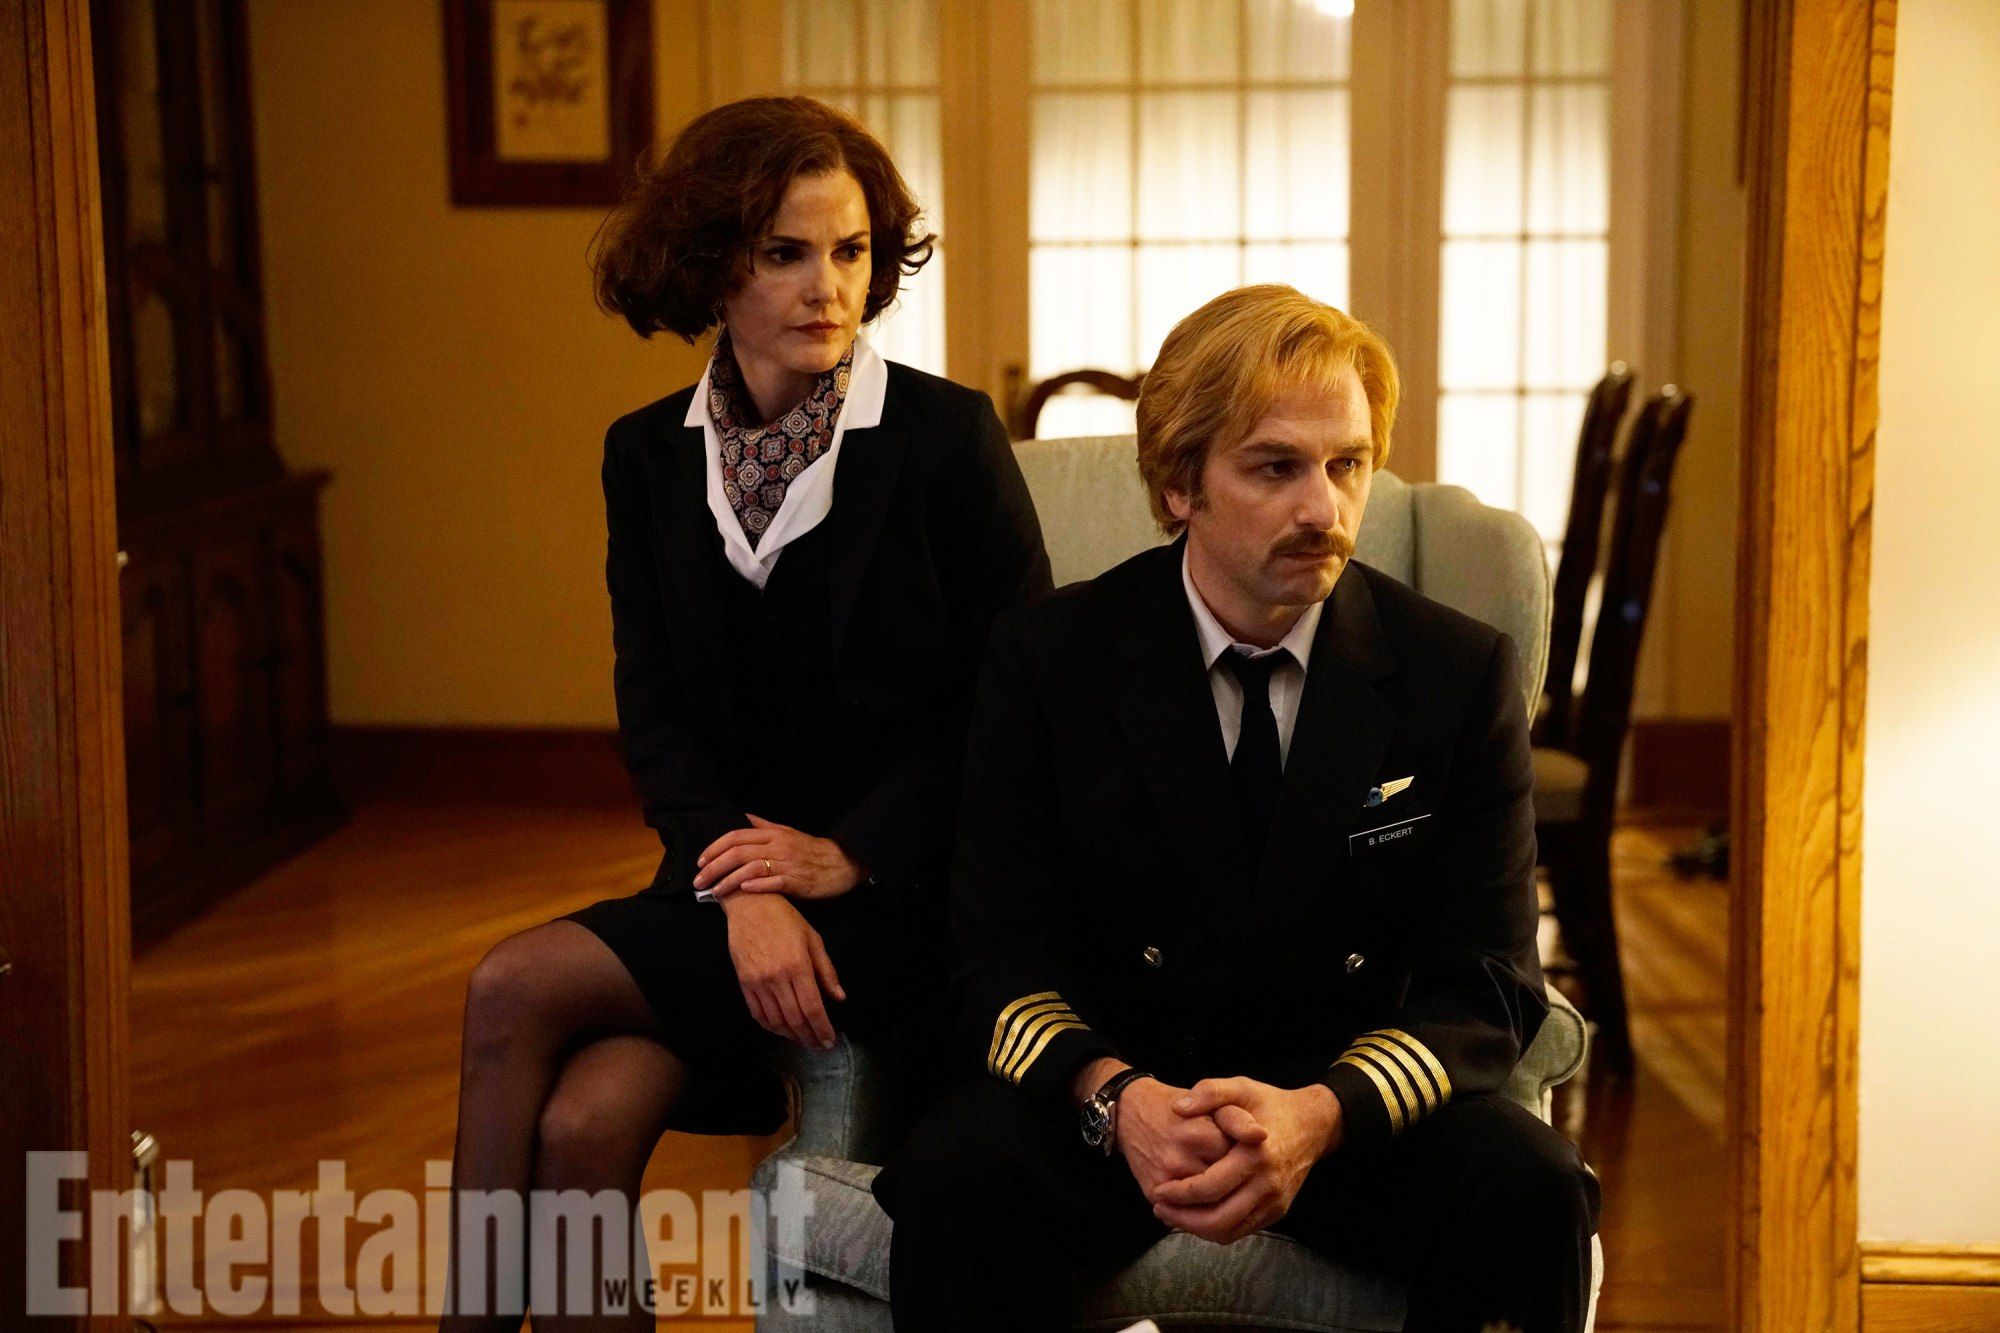 Keri Russell and Matthe Rhys in The American Season 5 FX